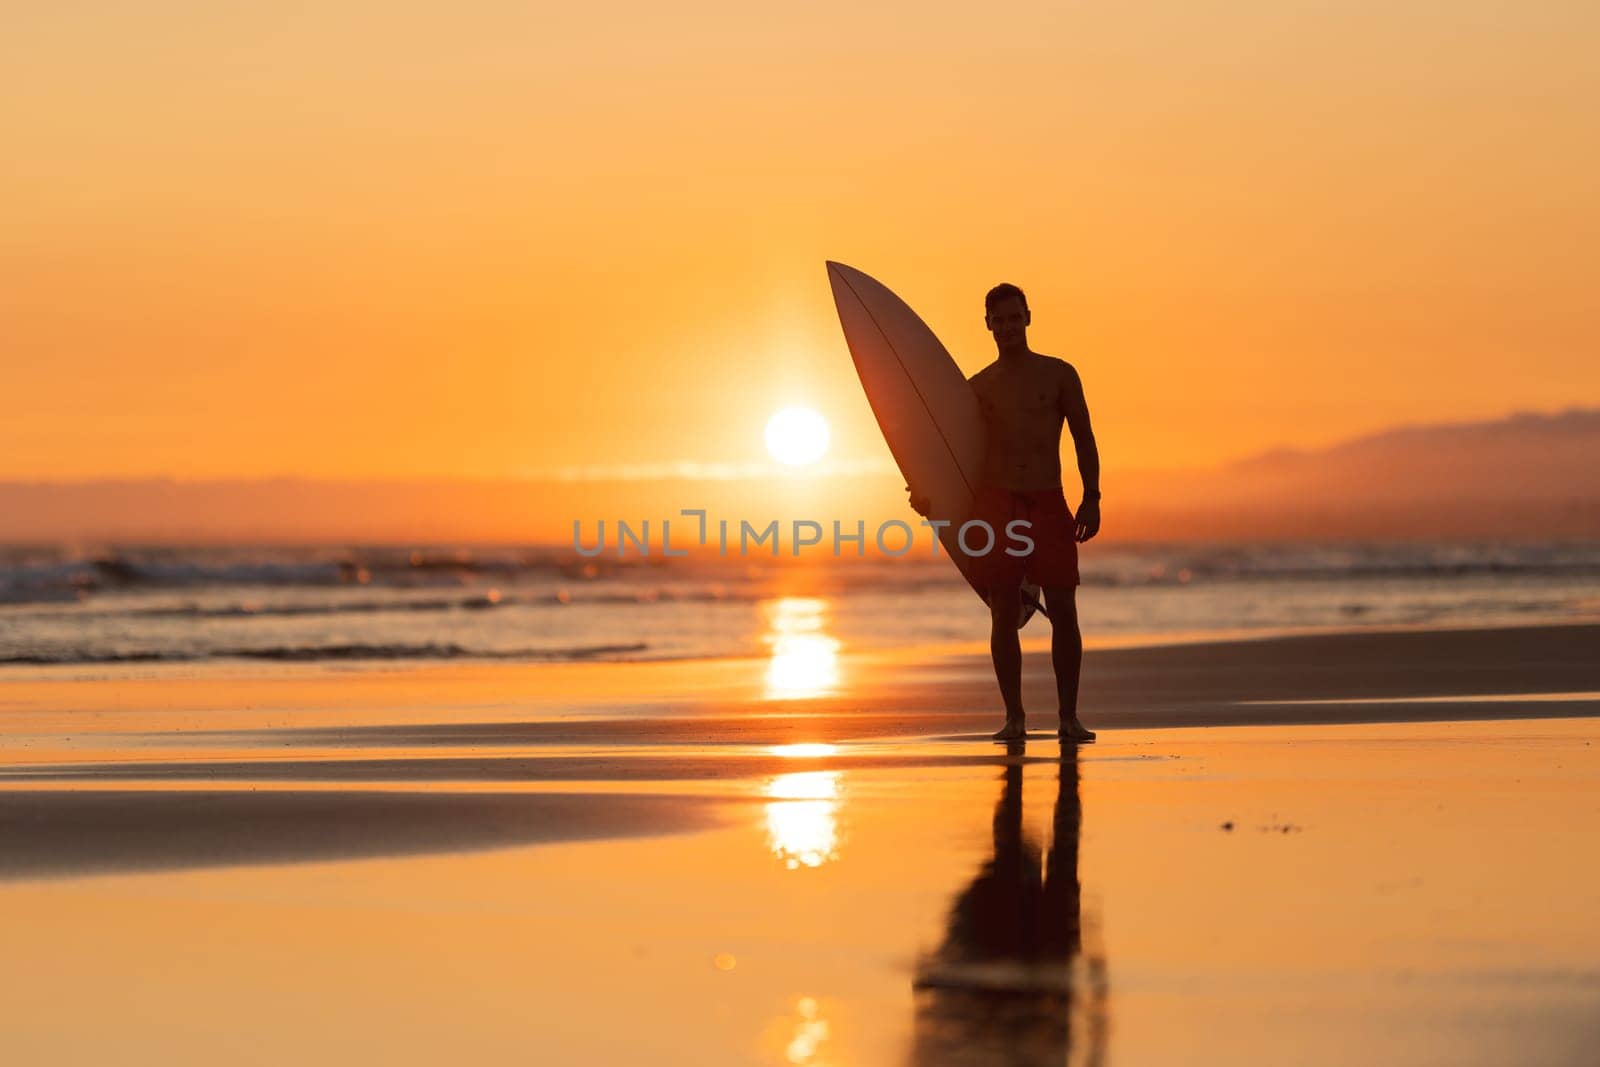 Black silhouette of an attractive man on the shore holding a surfboard at orange sunset. Mid shot